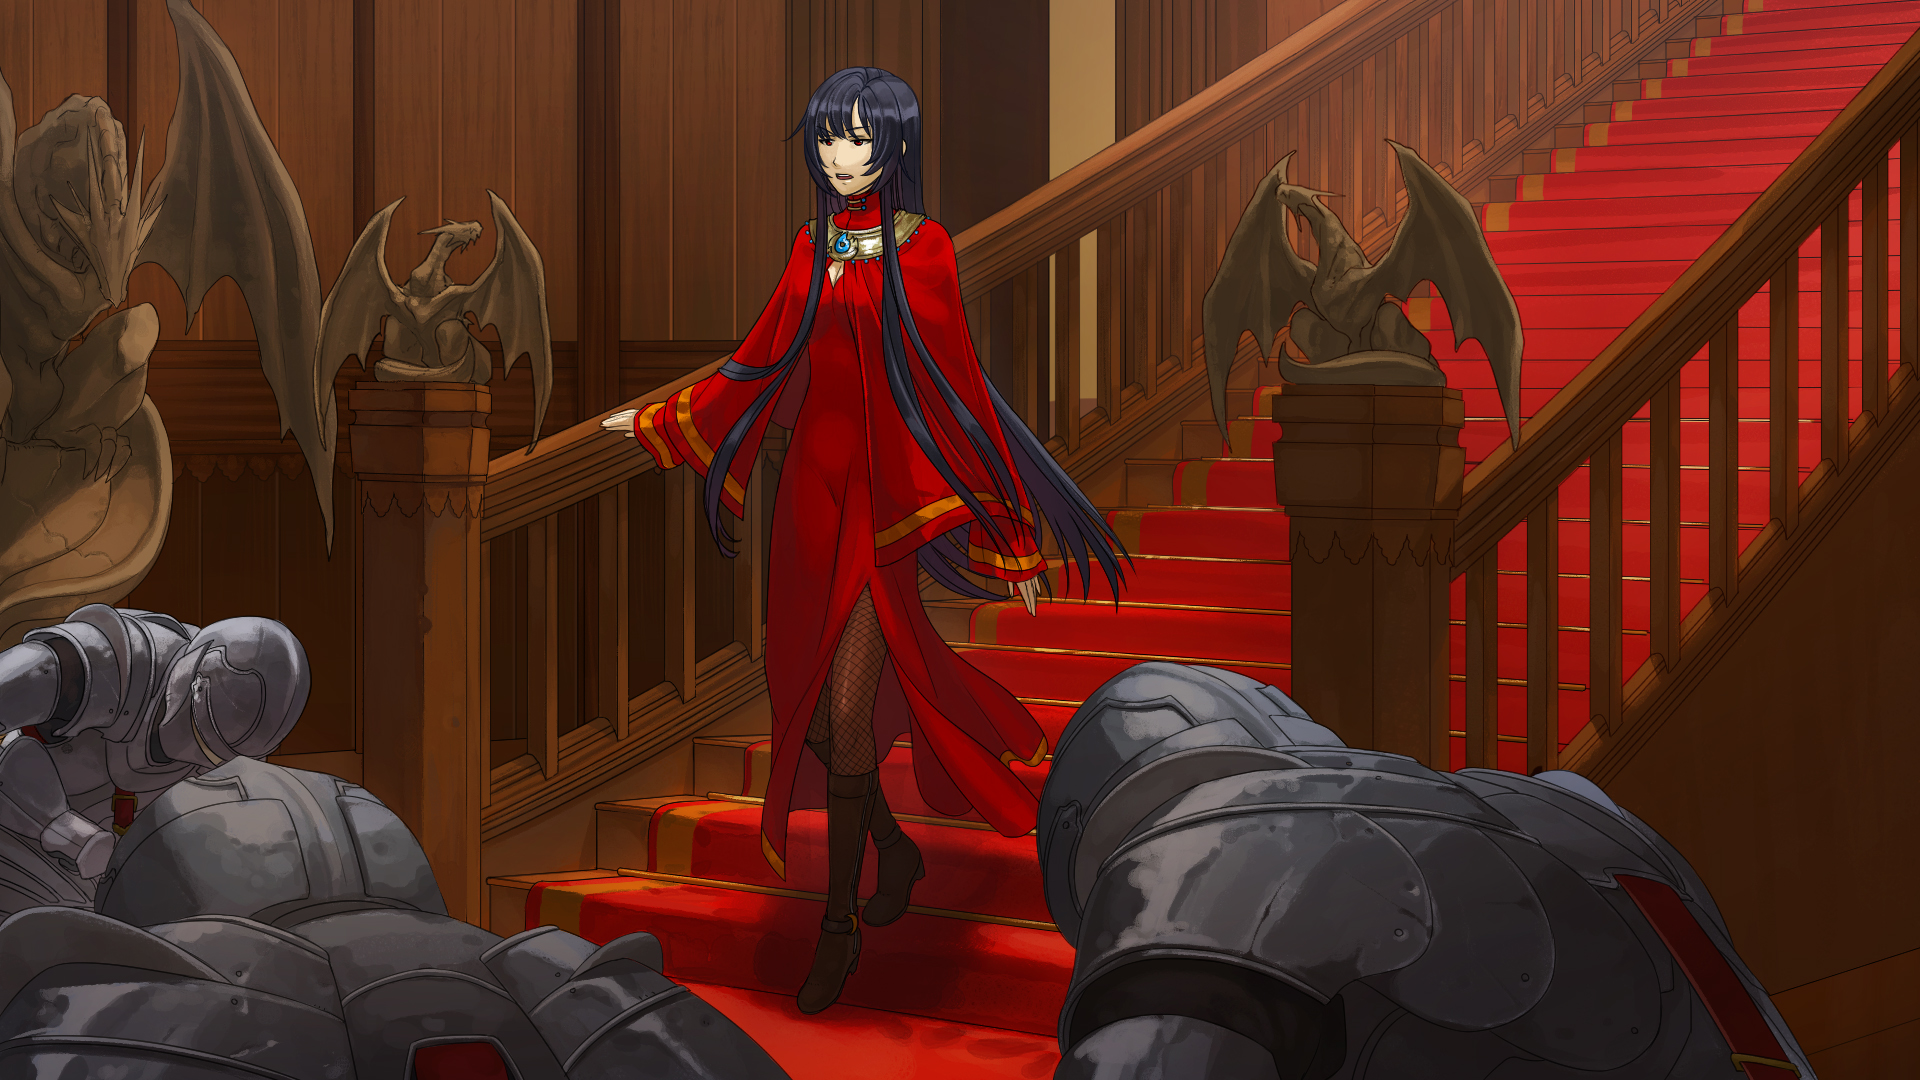 Artwork for Path of the Midnight Sun depicting Lady Faratras coming down stairs in the castle, with knights bowing.